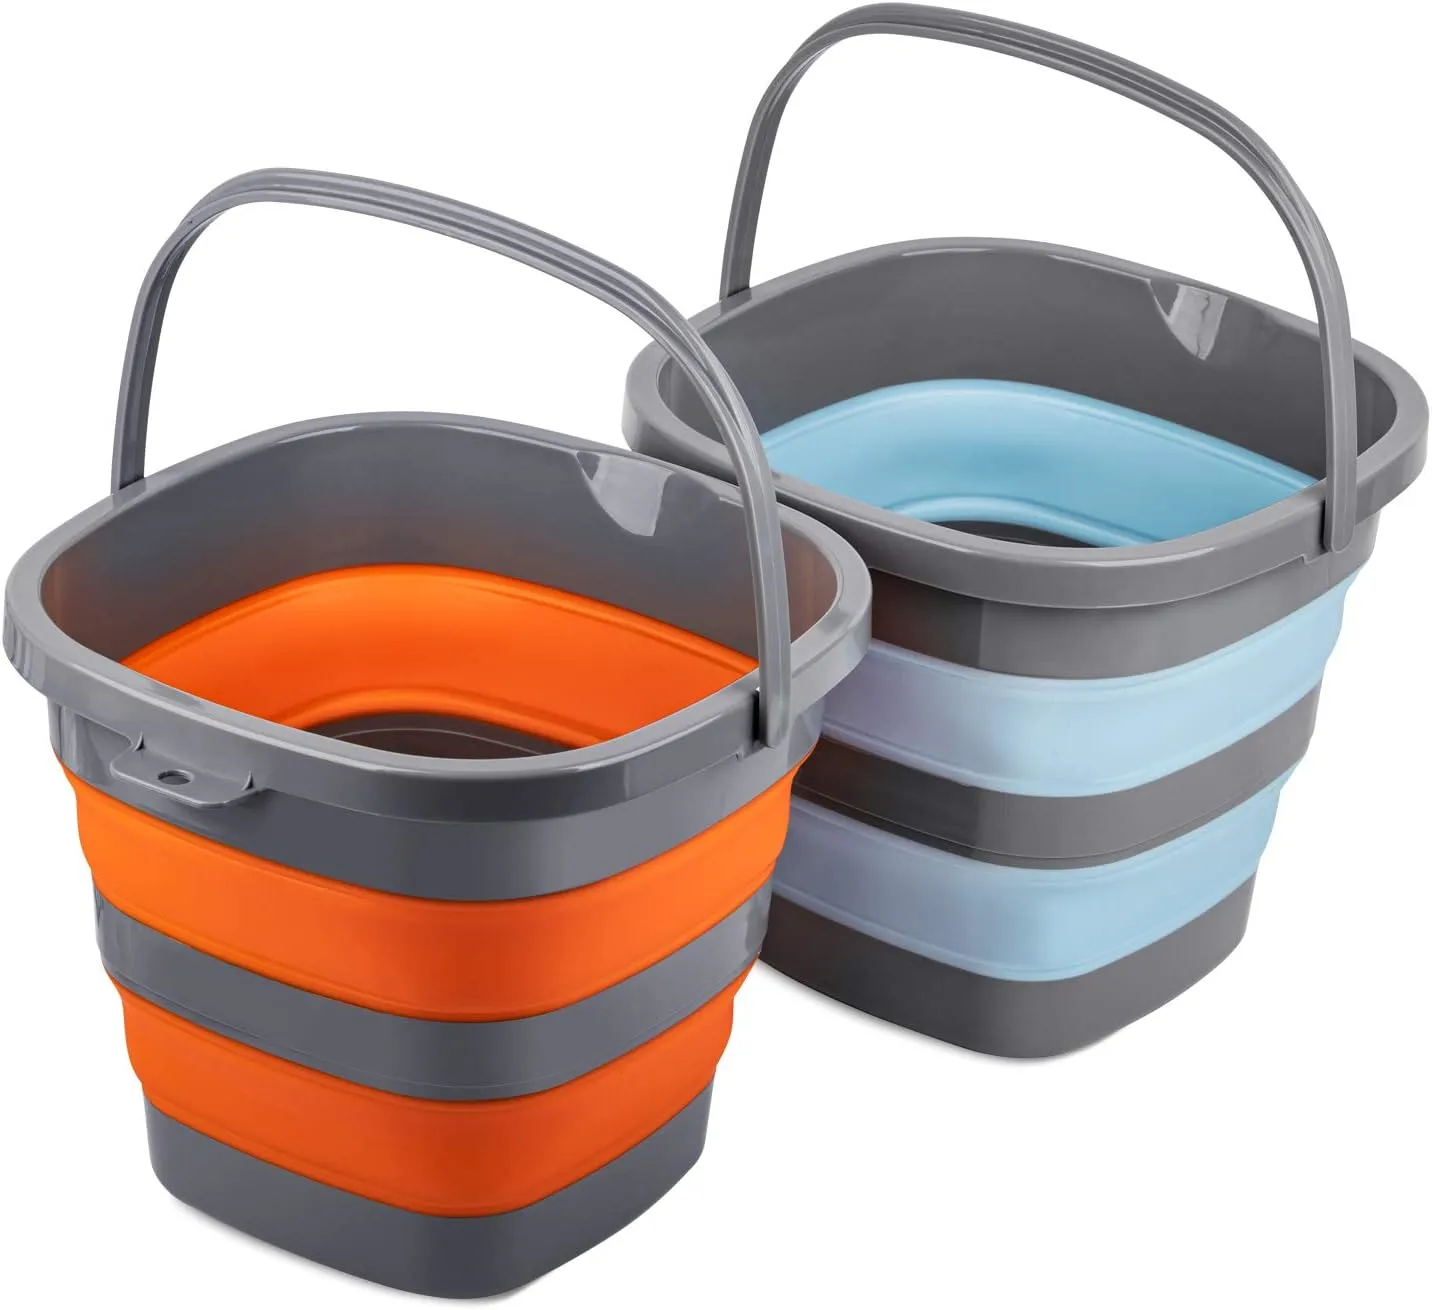 🎉🎉2024 New Year Hot Sale🚨⛓️2 Pack Collapsible Plastic Bucket with 2.6 Gallon (10L) Each, Foldable Rectangular Tub for House Cleaning, Space Saving Outdoor Waterpot for Garden or Camping, Portable Fishing Water Pail